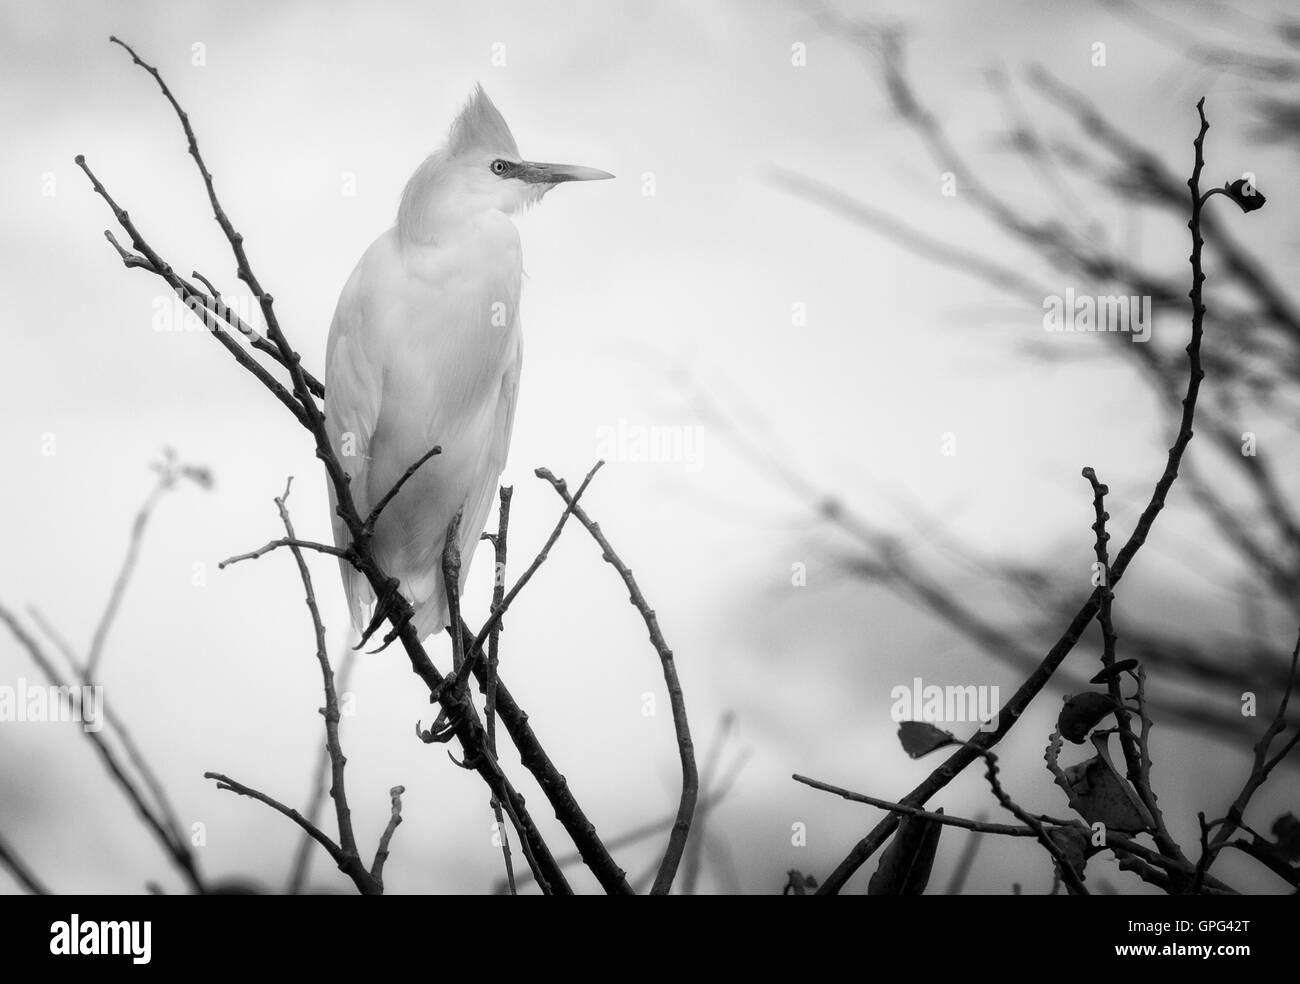 In this high key black and white image a White Cattle Egret stands against a bright white sky defined only by shades of gray. Stock Photo